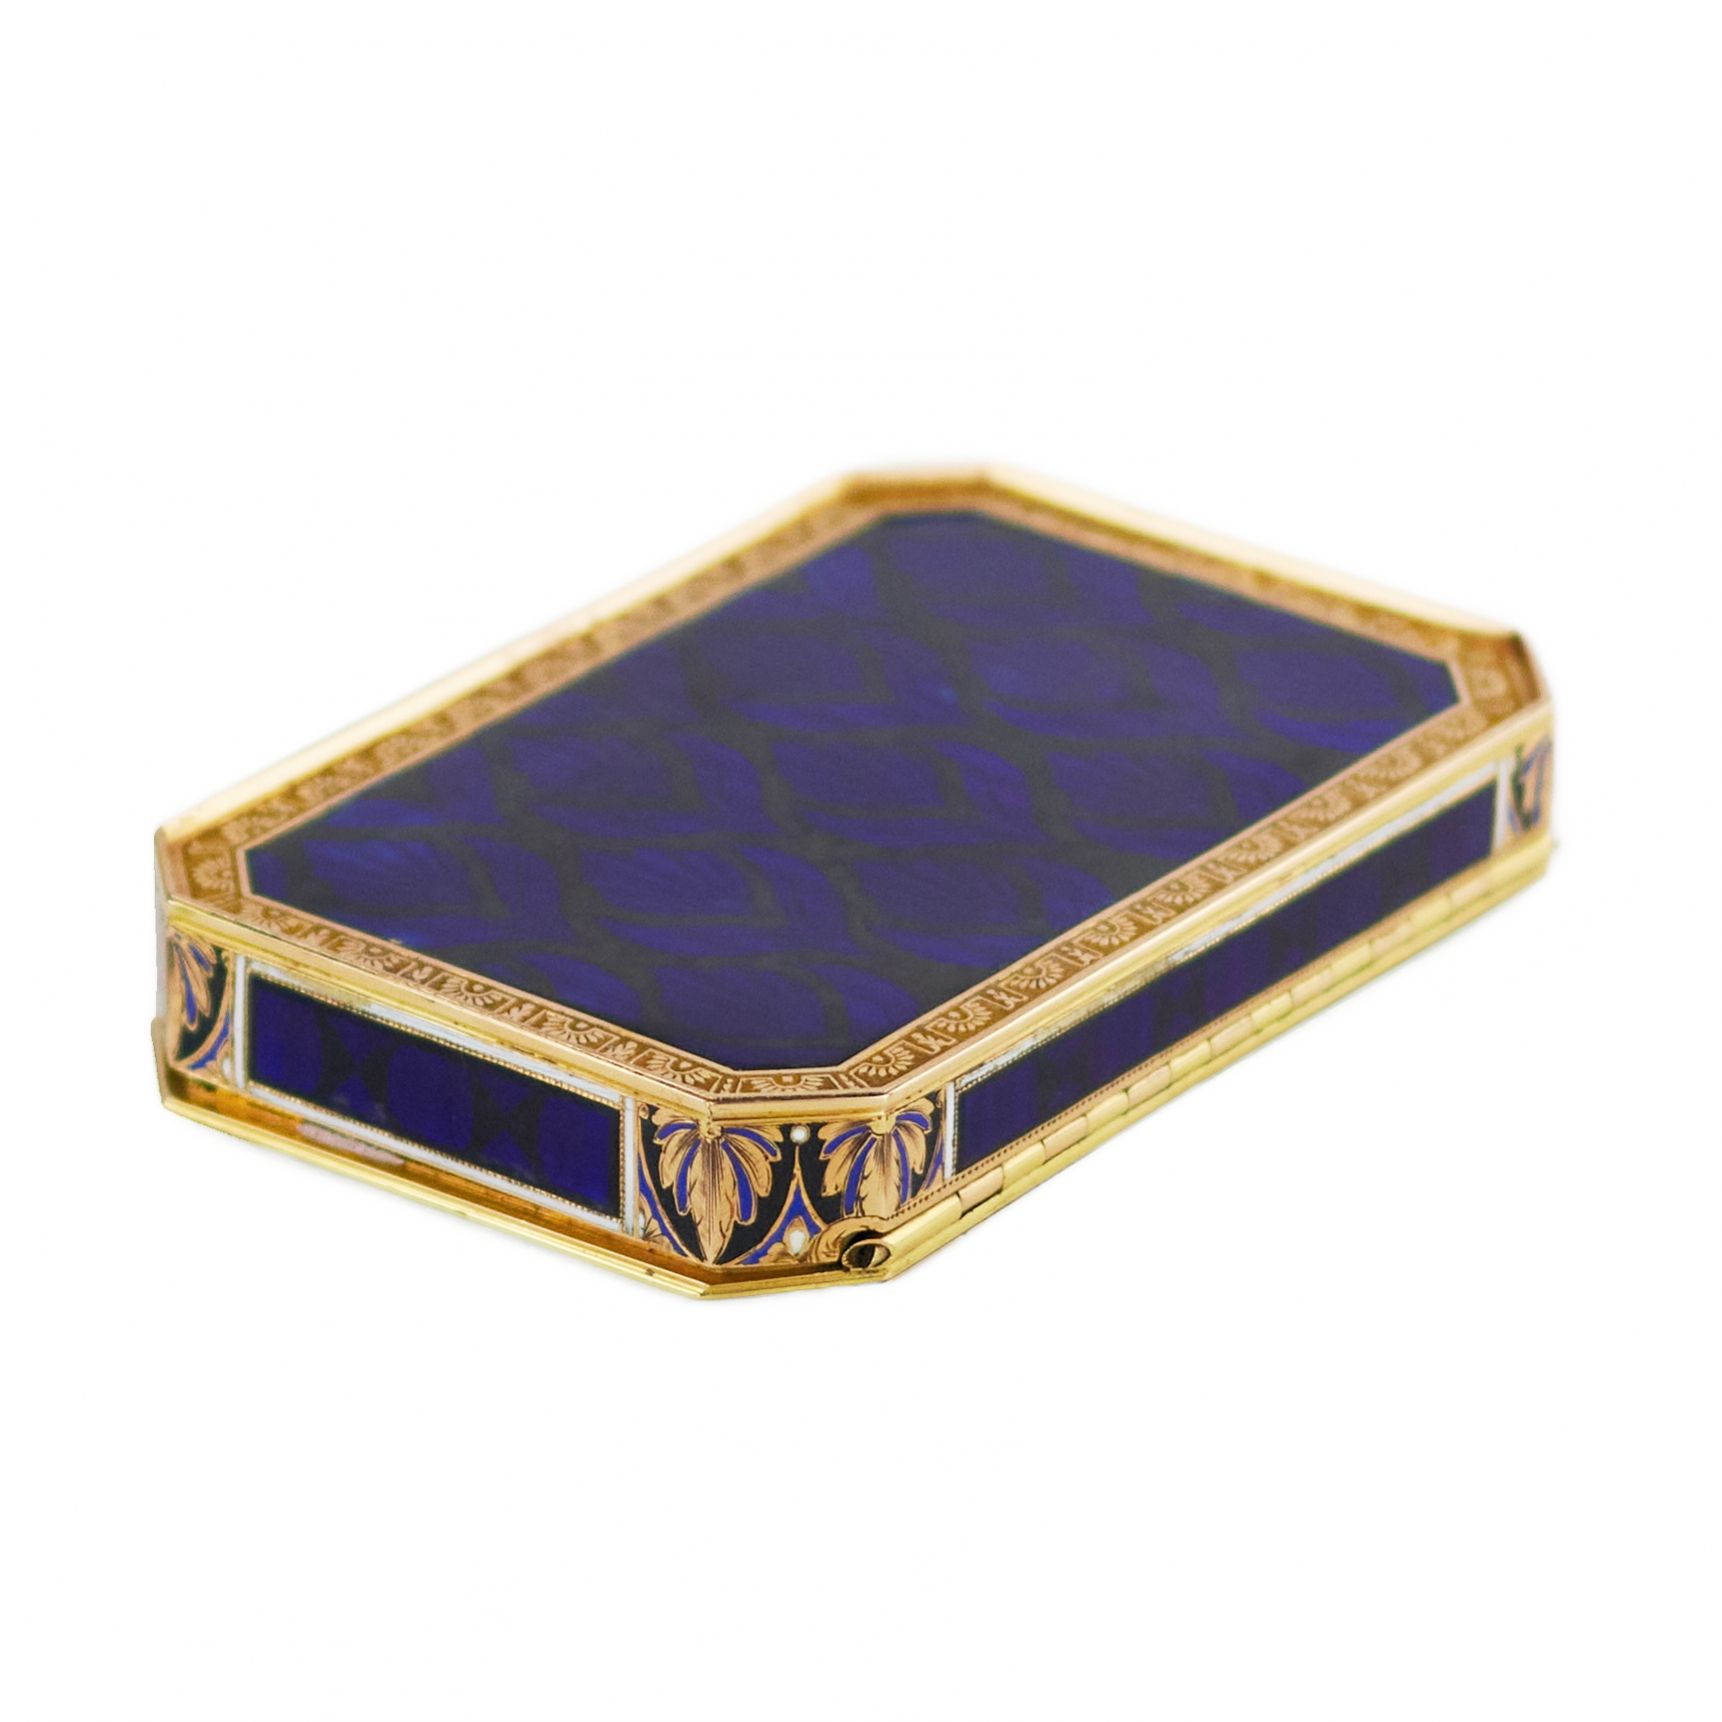 Gold snuff box with enamel. Jean George Remond & Compagnie. 1810. - Image 6 of 6